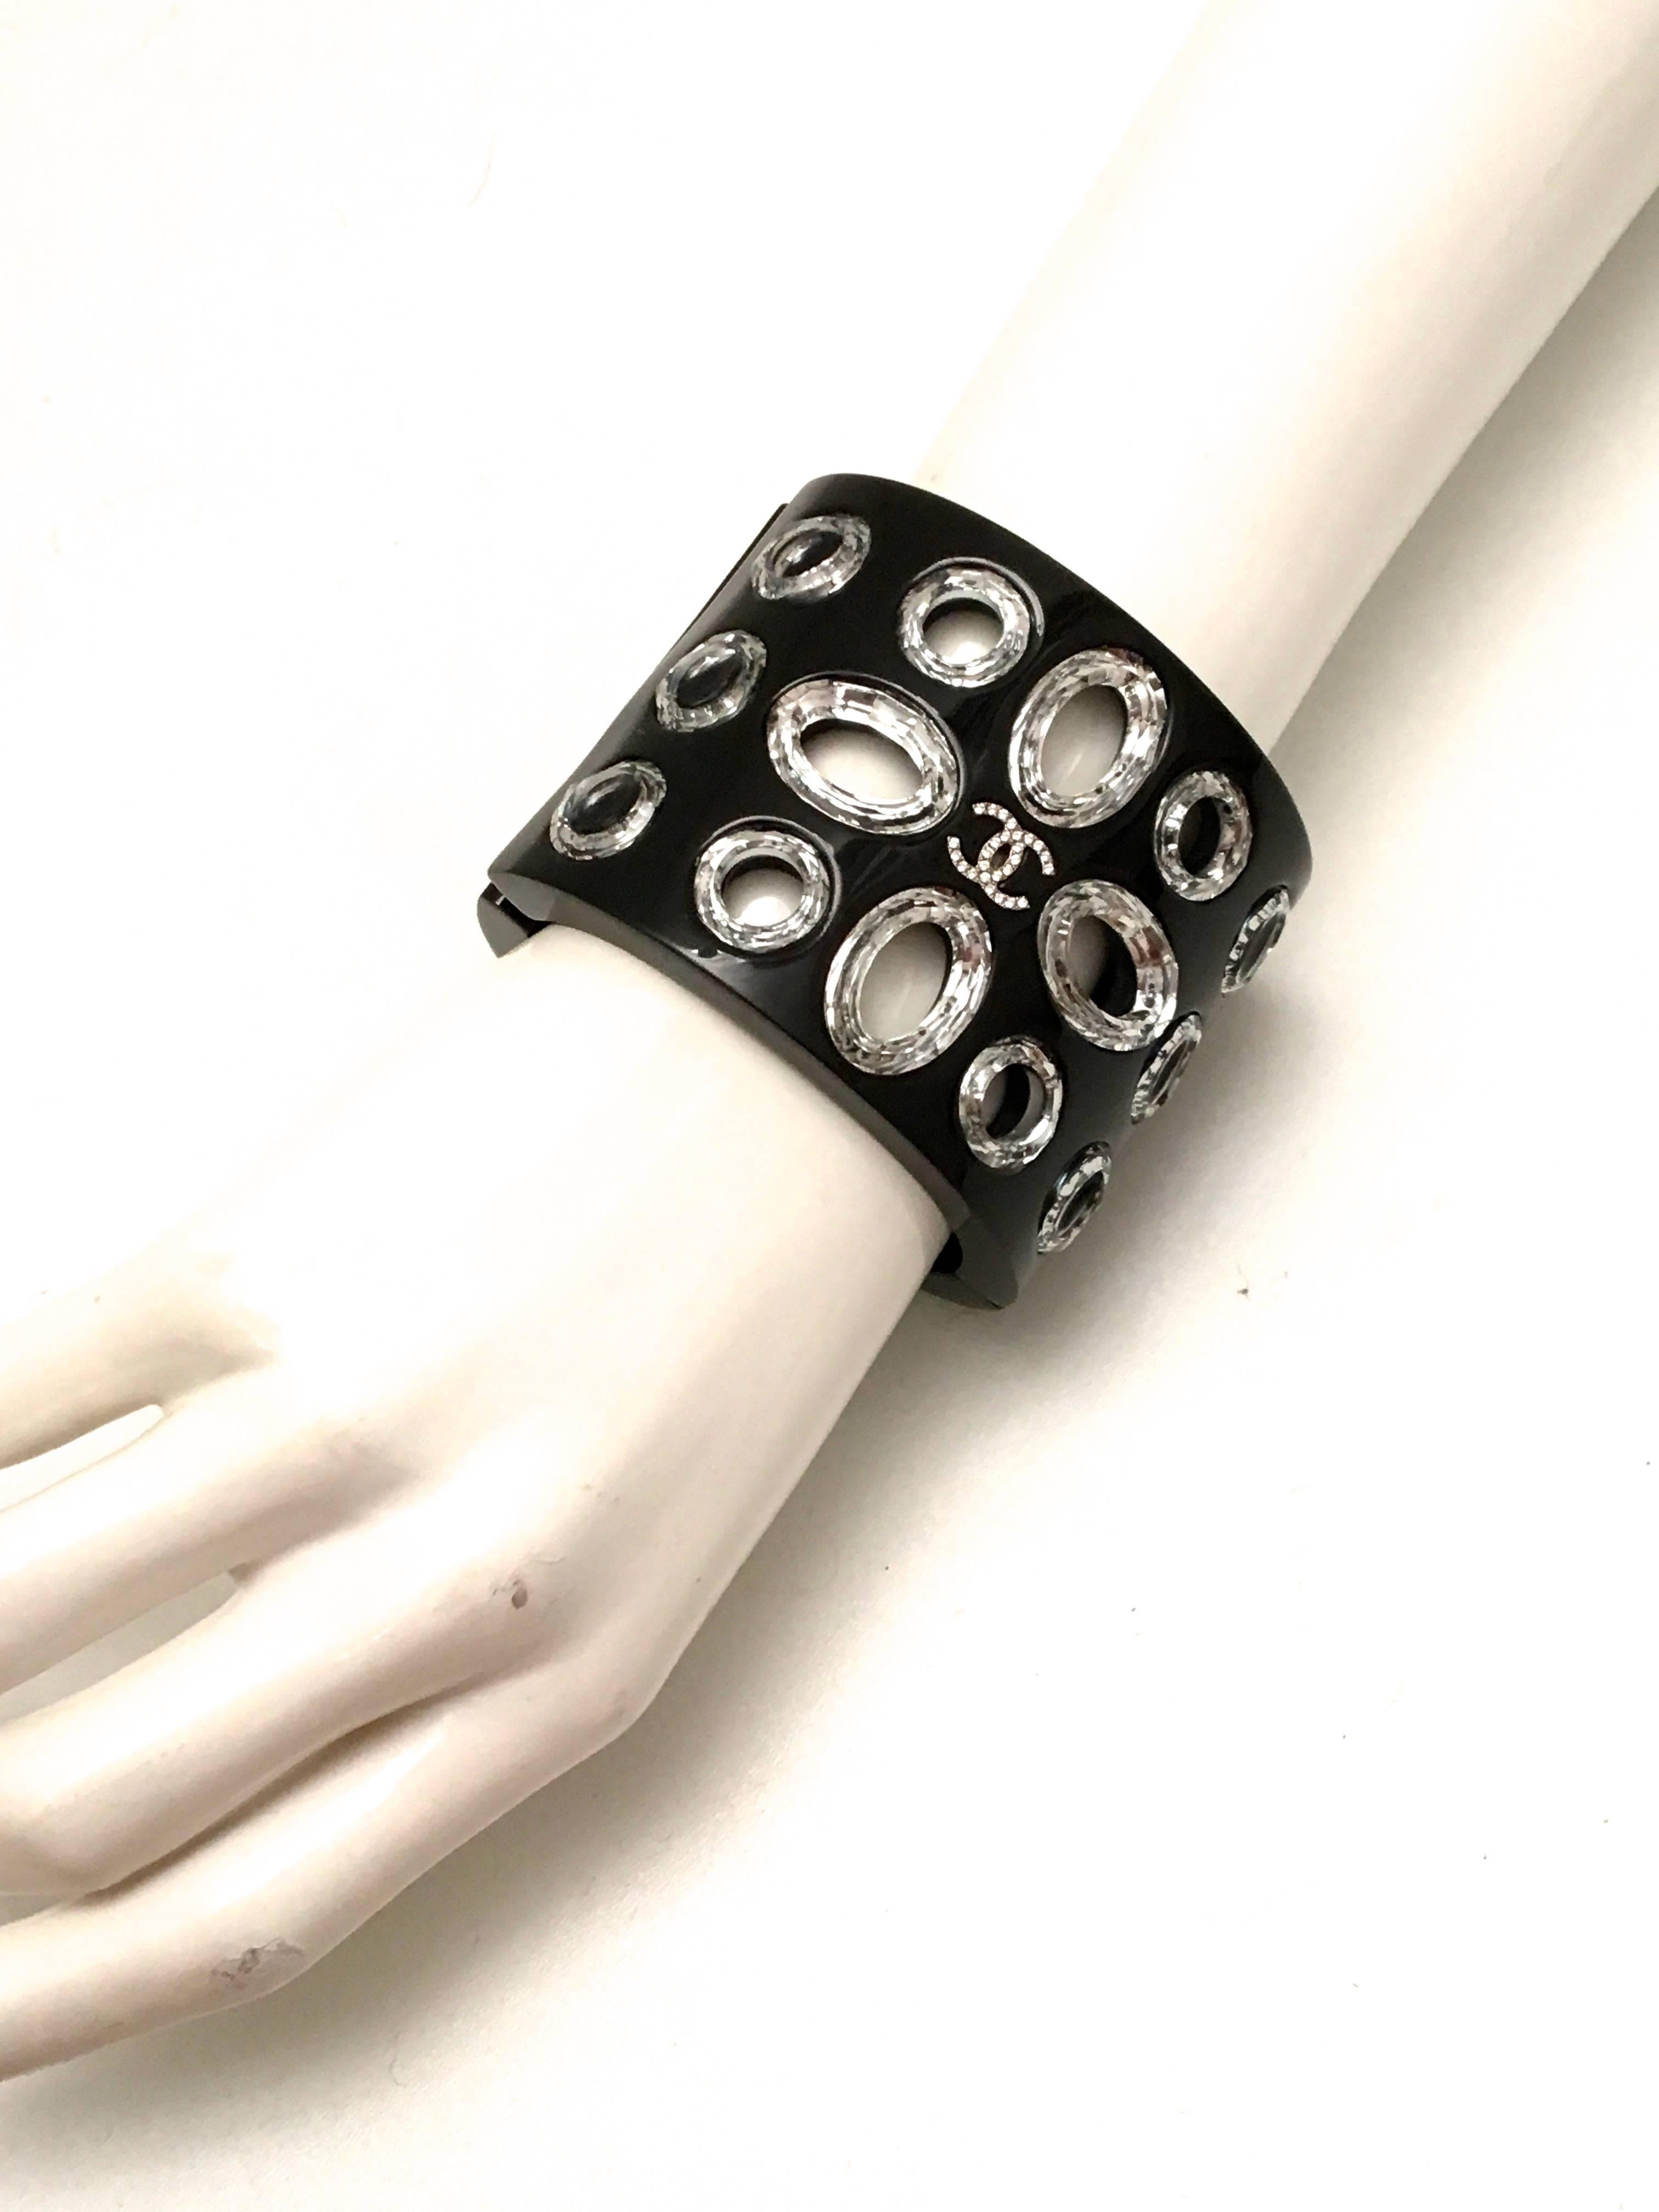 Chanel Cuff Bracelet - Lucite and Swarovski Crystals In Excellent Condition For Sale In Boca Raton, FL